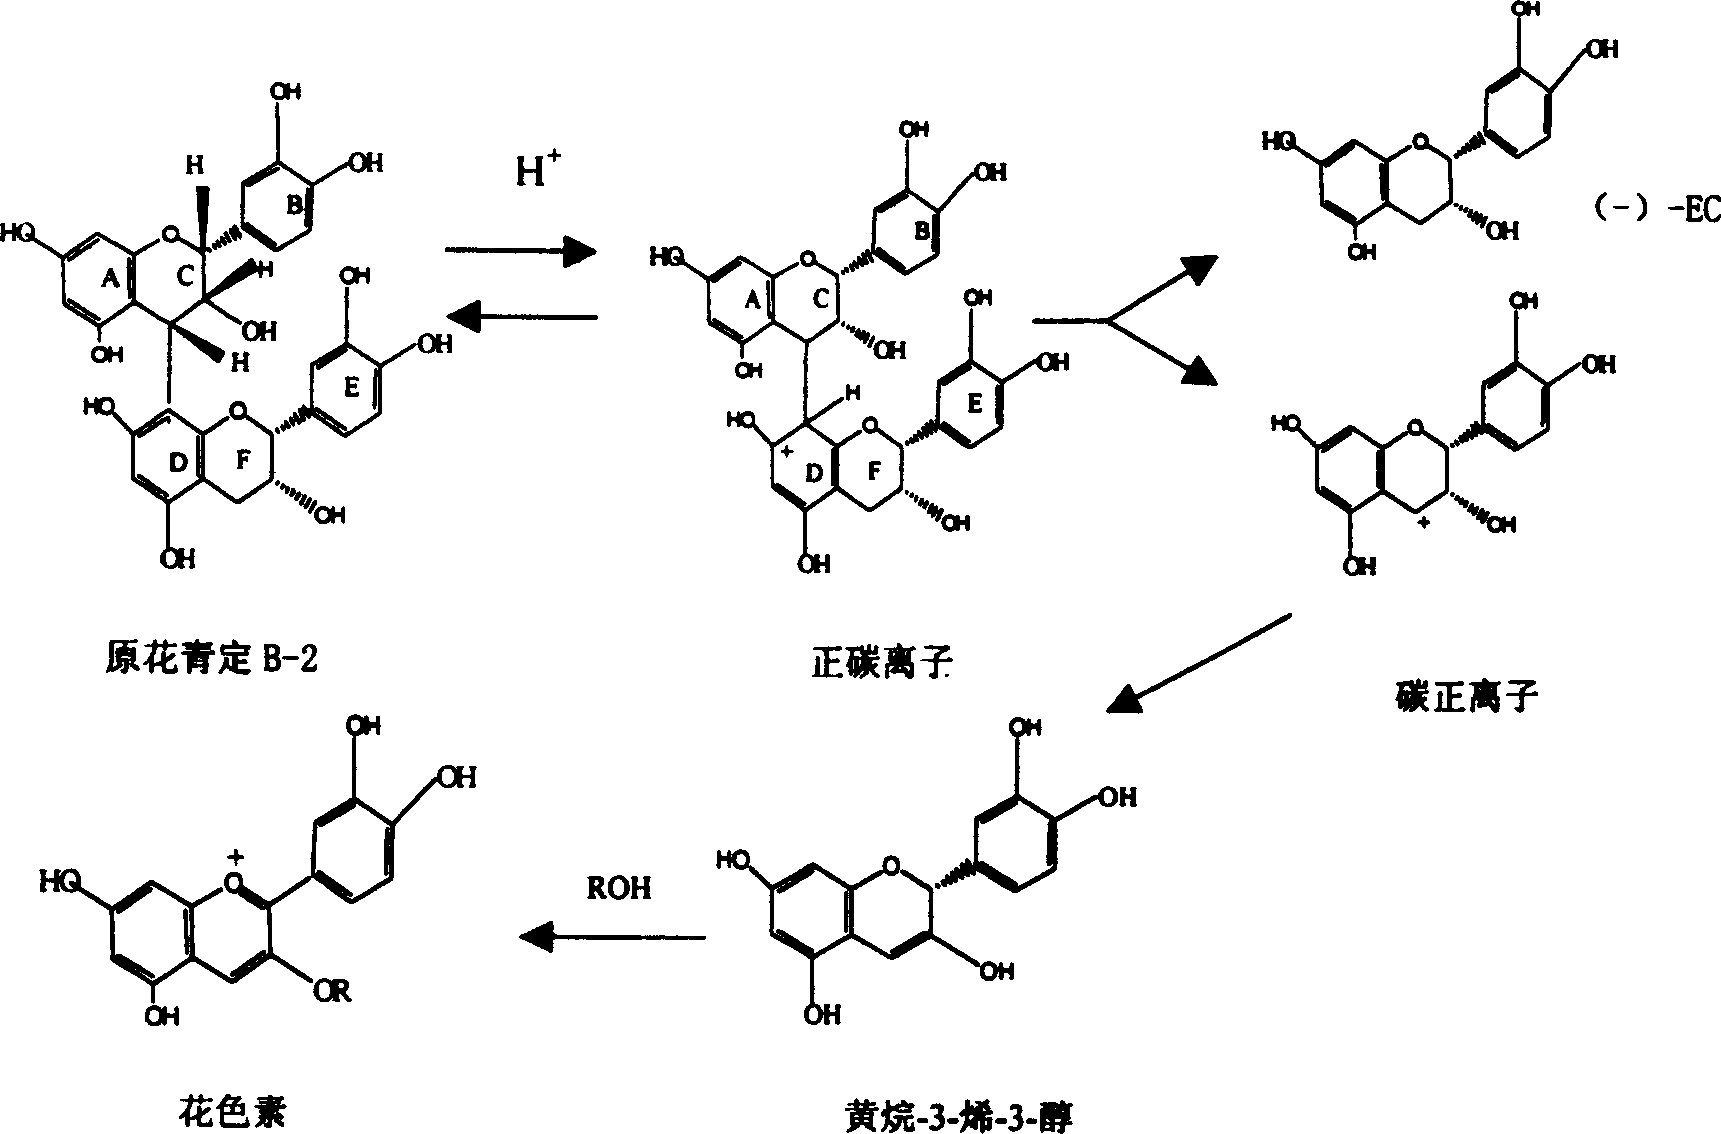 Extraction and separation of proto flower haematochrome and preparation method of its derivatives